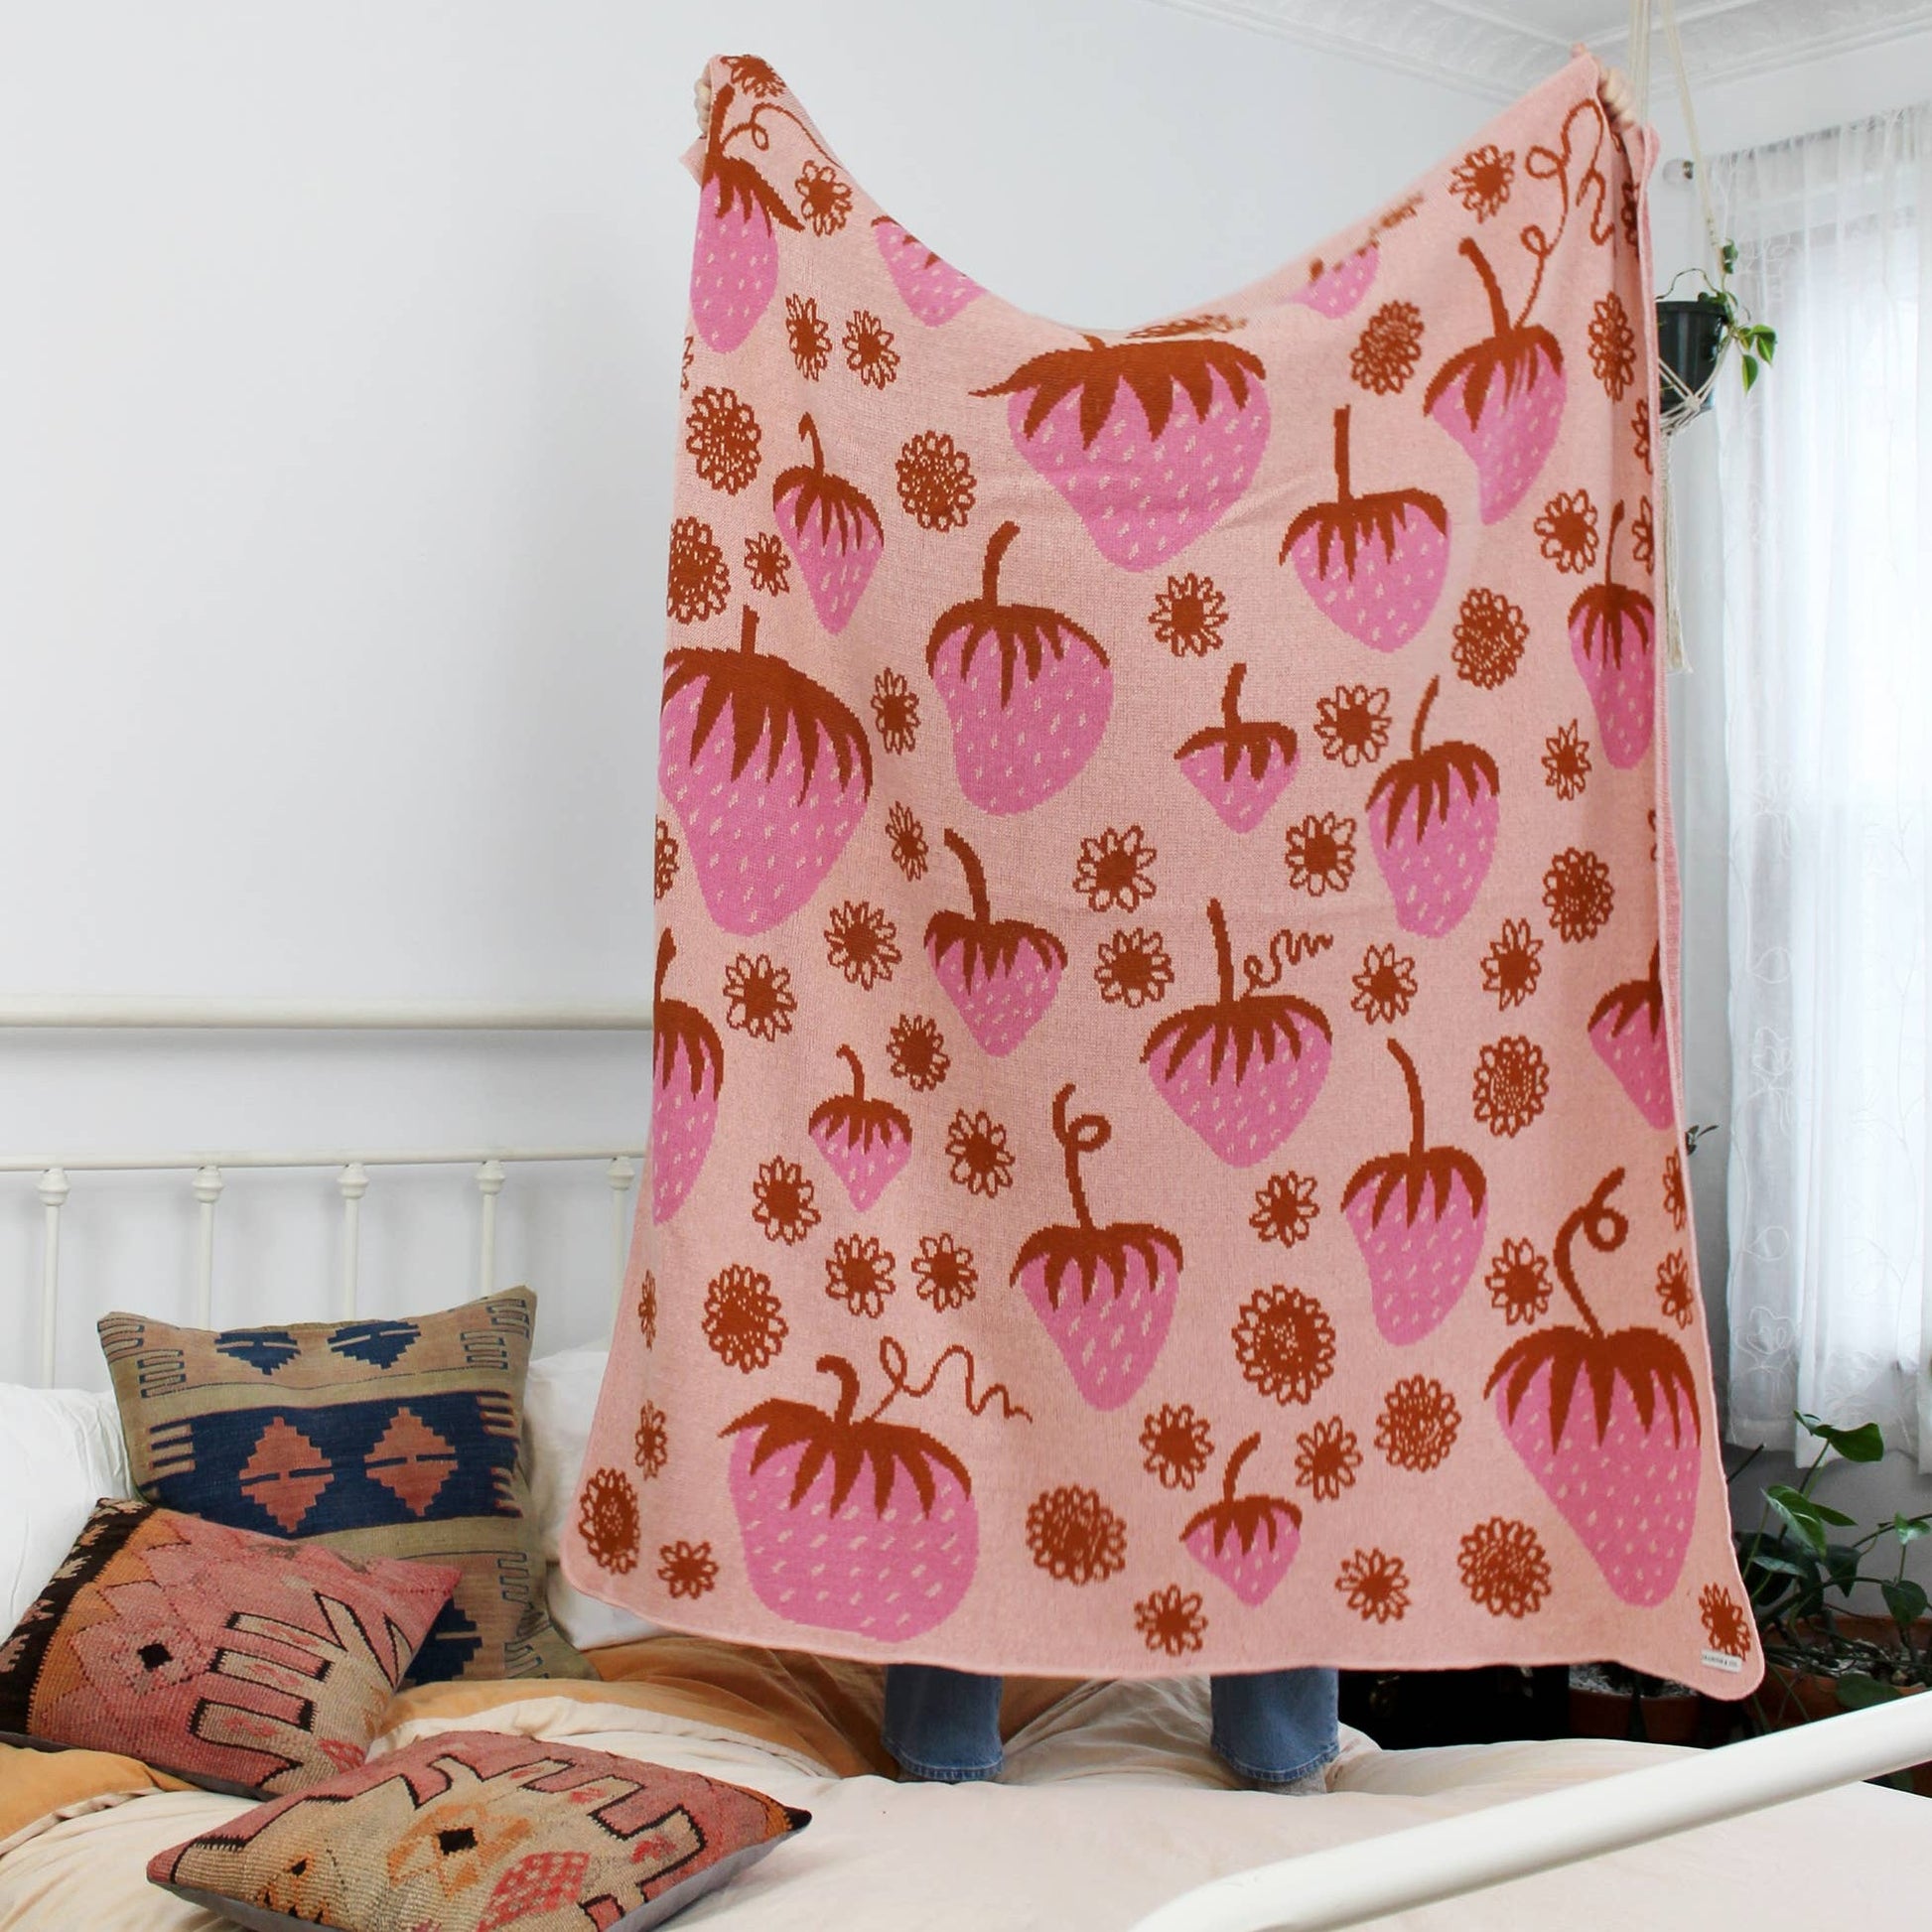 Knit blanket held up by a person on their bed --- majority of the blanket is light pink with different sized strawberries in a darker shade of pink and orange, along with flowers that are also orange all over it 